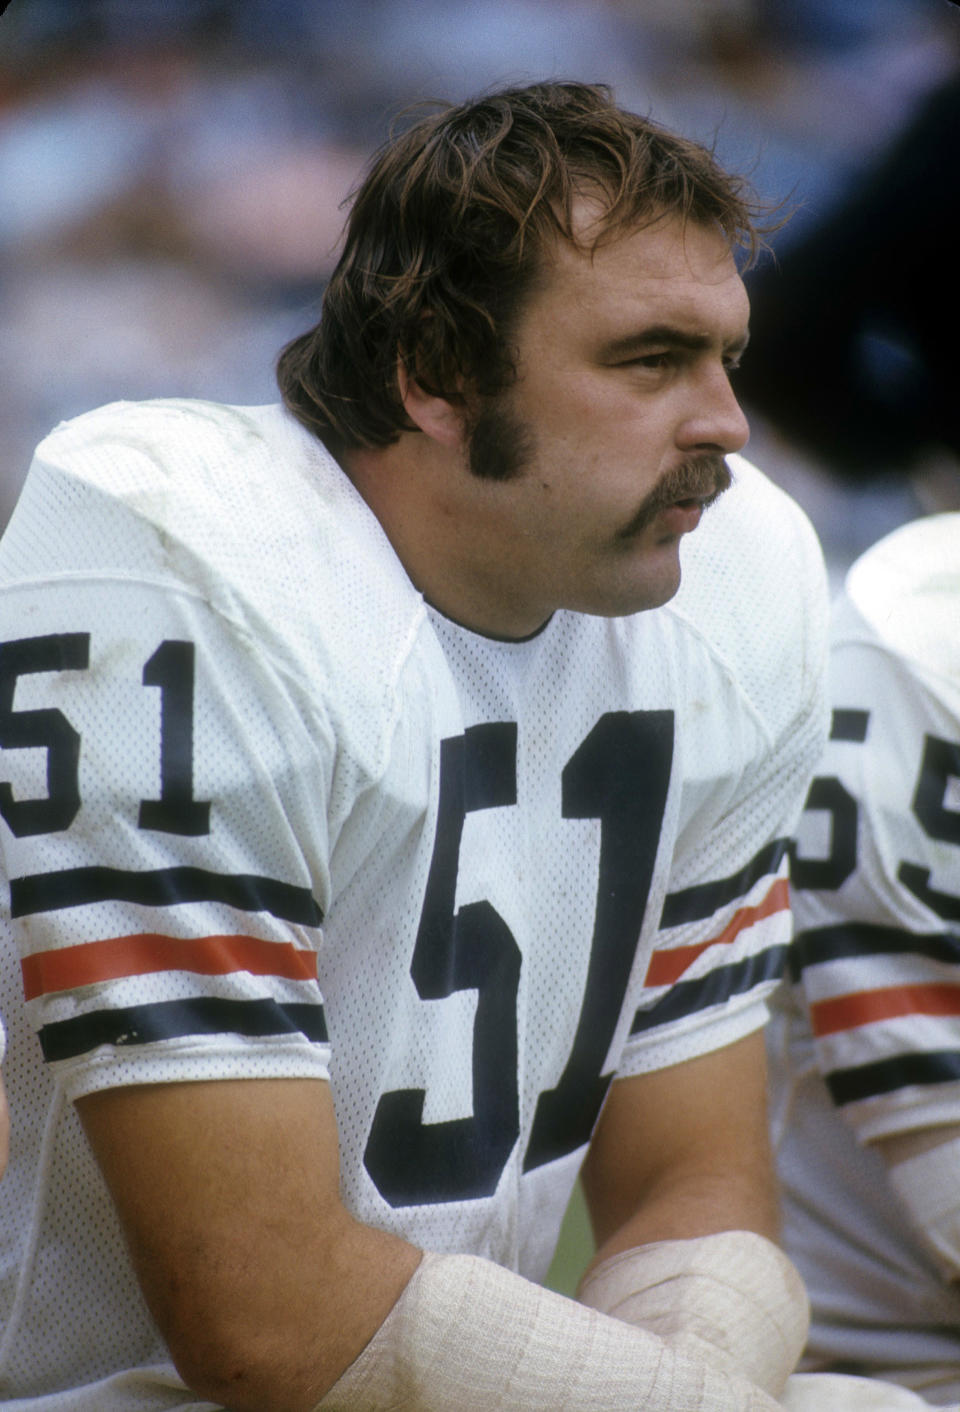 ATLANTA, GA - CIRCA 1970: Linebacker Dick Butkus #51 of the Chicago Bears in this portrait watching the action from the bench against the Atlanta Falcons during an NFL football game circa 1970 at Atlanta-Fulton County Stadium in Atlanta, Georgia. Butkus played for the Bears from 1965-73. / Credit: Focus On Sport / Getty Images